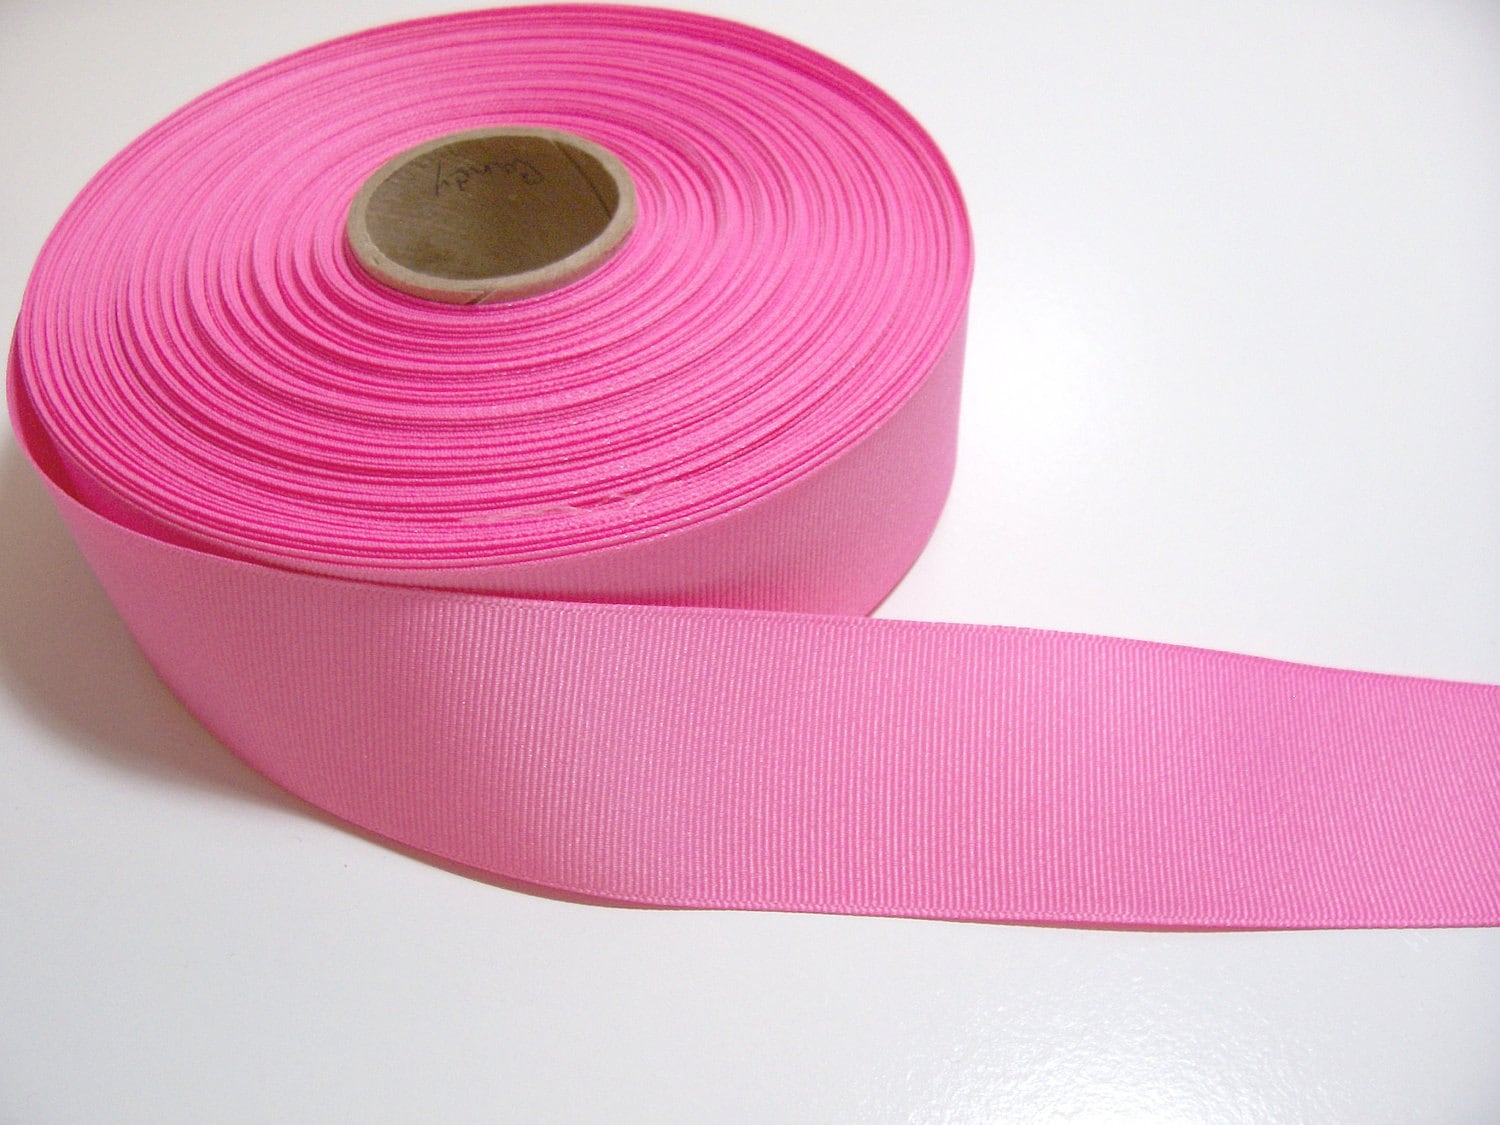 Pink Ribbon, Candy Pink Grosgrain Ribbon 1 1/2 inches wide x 10 yards ...